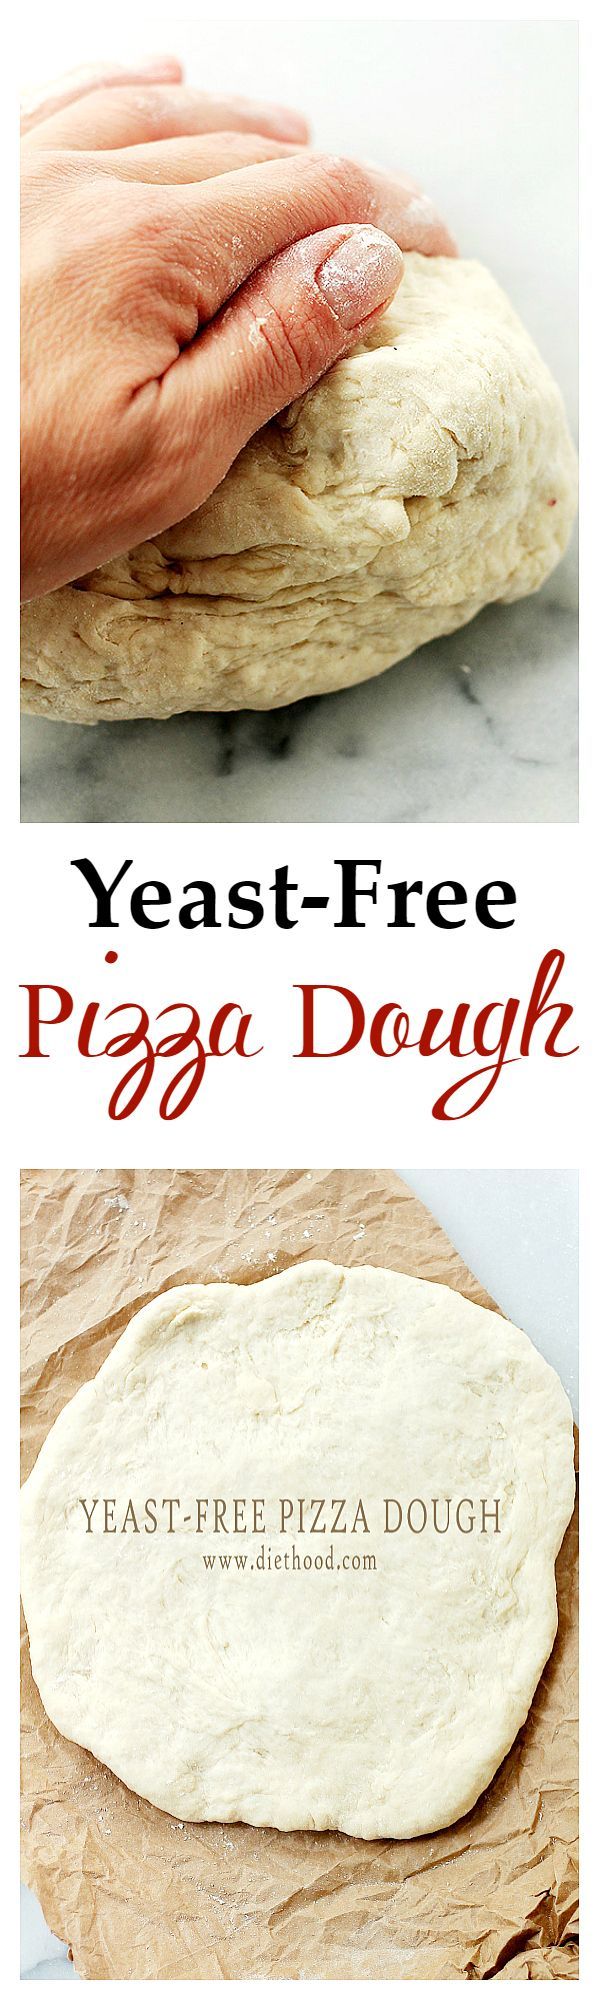 Yeast-Free Pizza Dough | www.diethood.com | Fast and simple recipe for Pizza Dough made without yeast! This is very good and SO